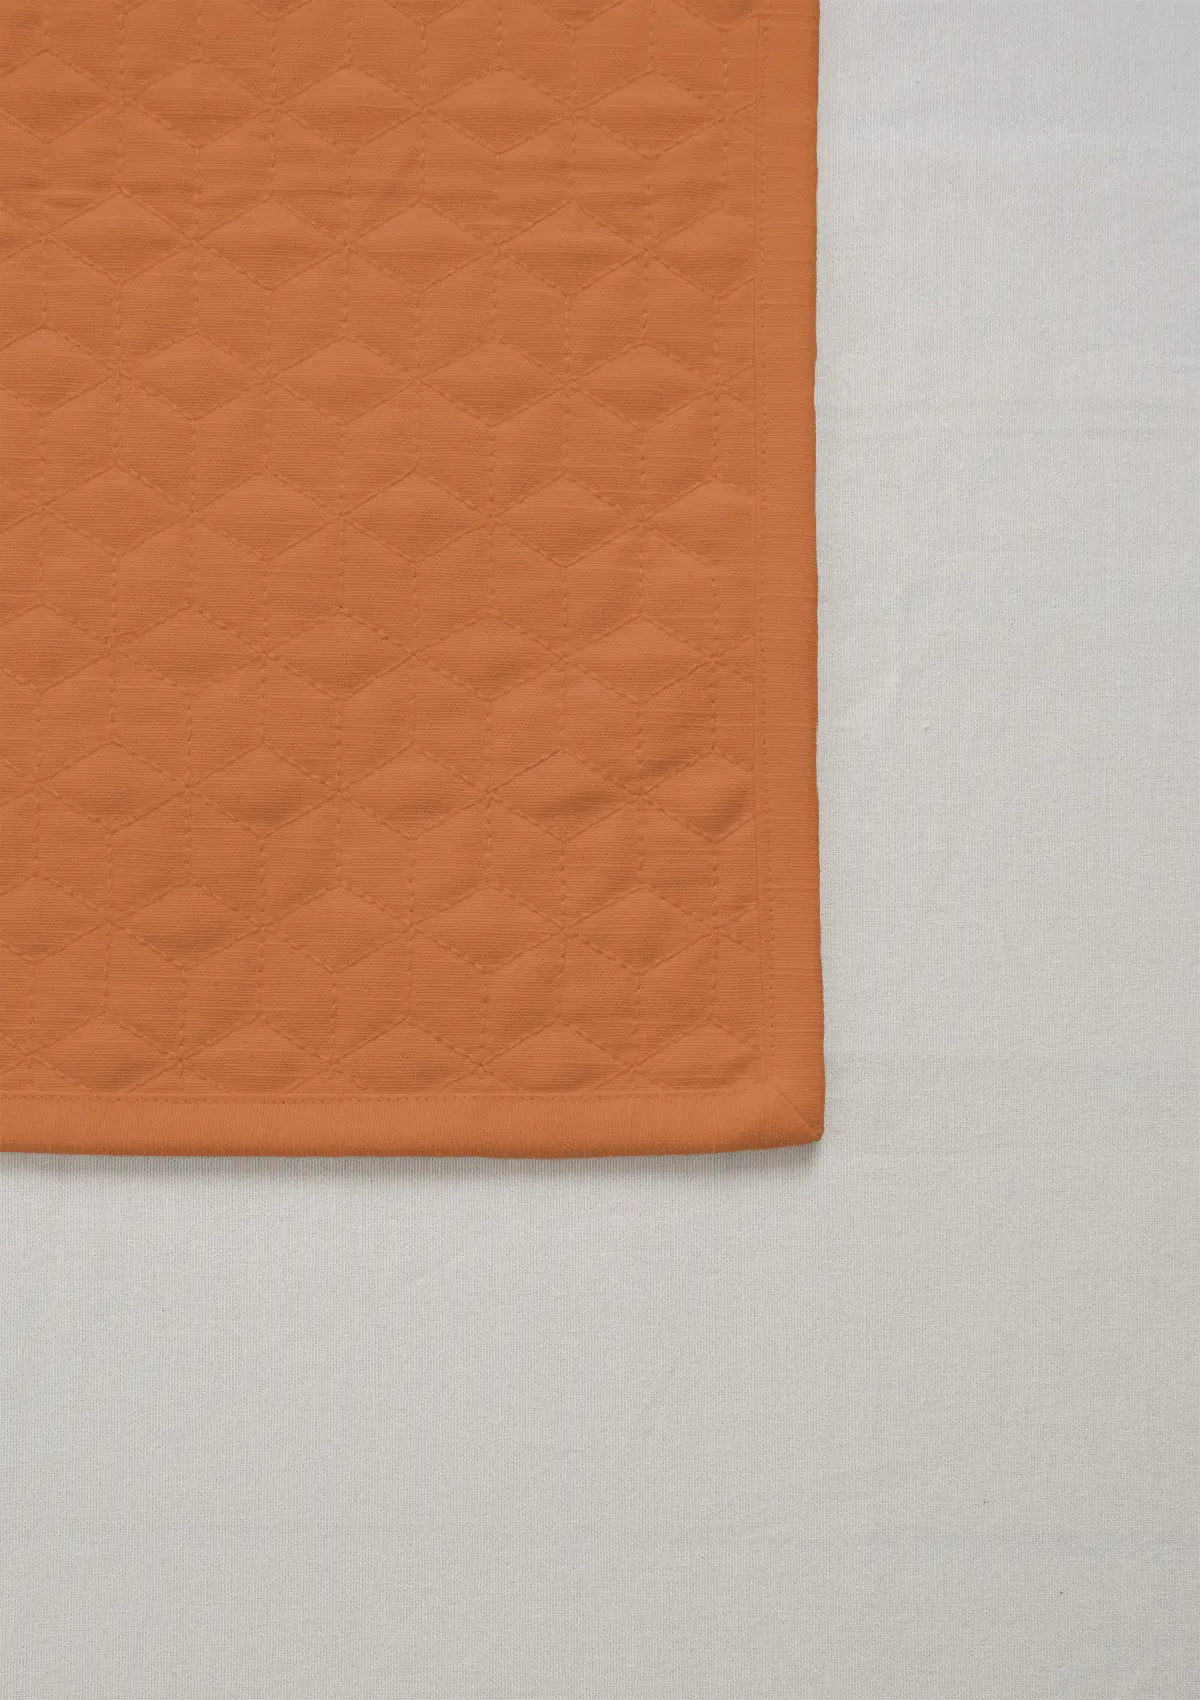 Solid 100% cotton quilted placemat for 4 seater or 6 seater dining - Orange